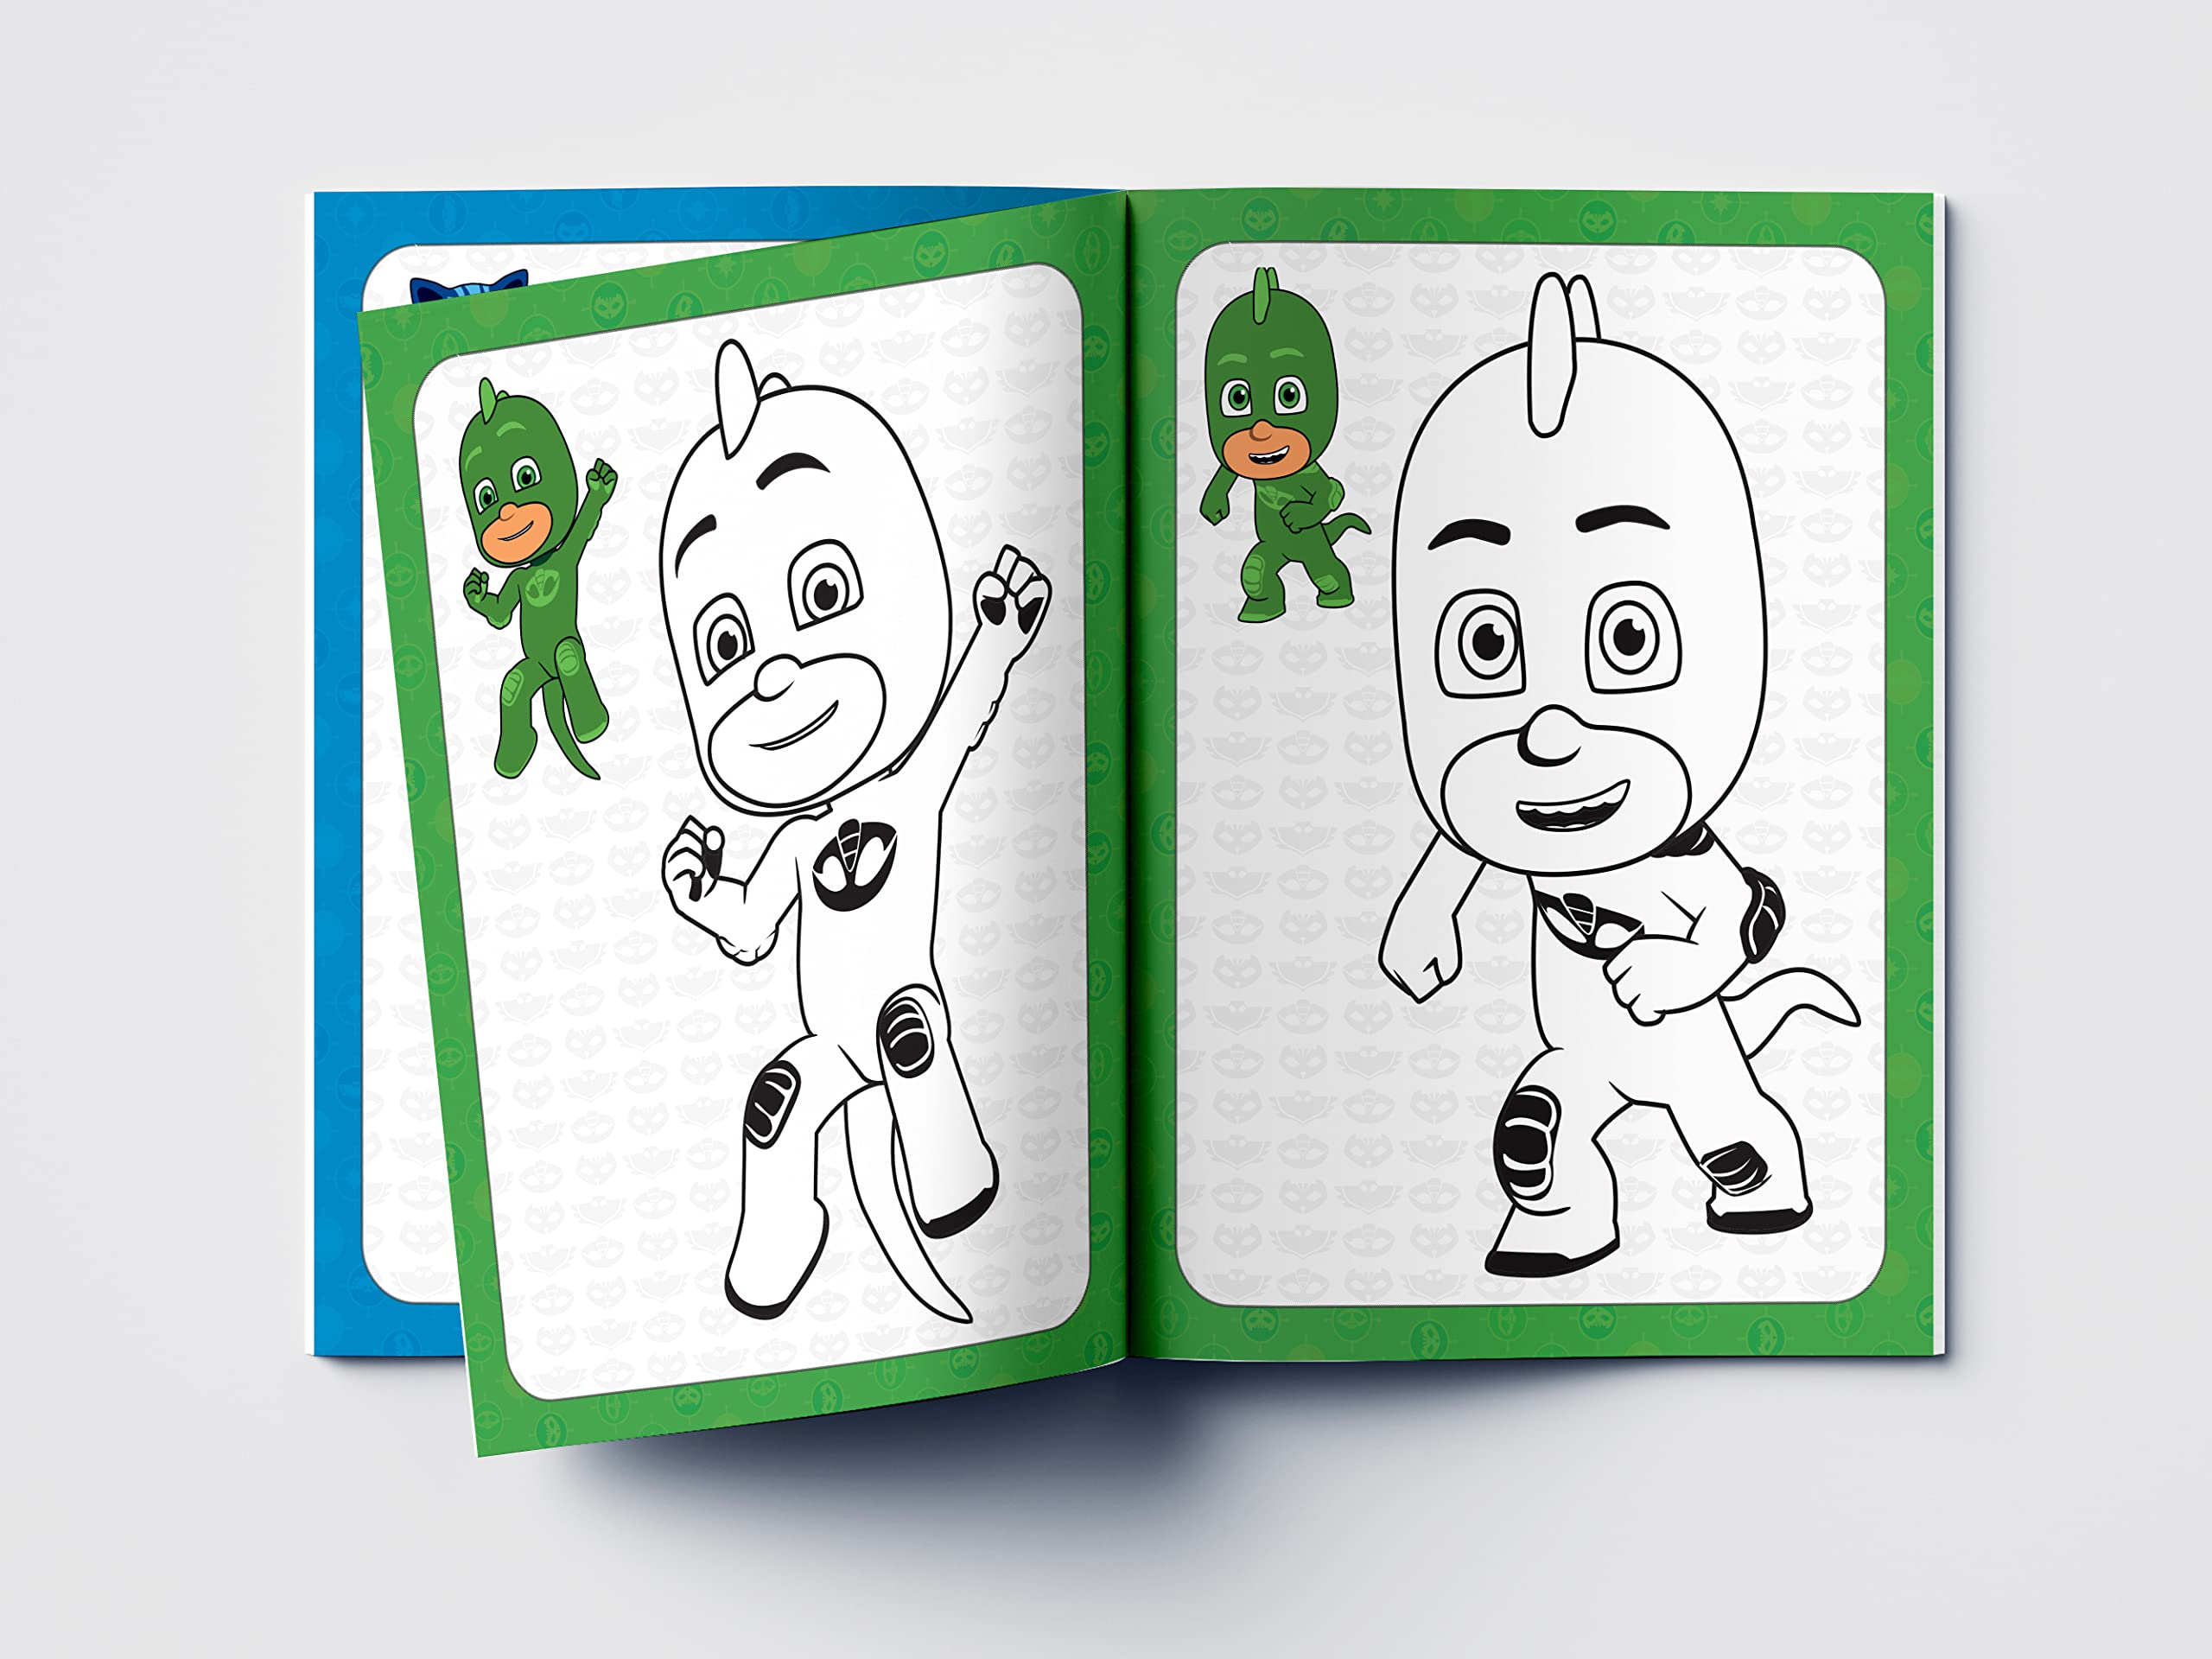 PJ Masks To The Rescue Coloring Book For Kids